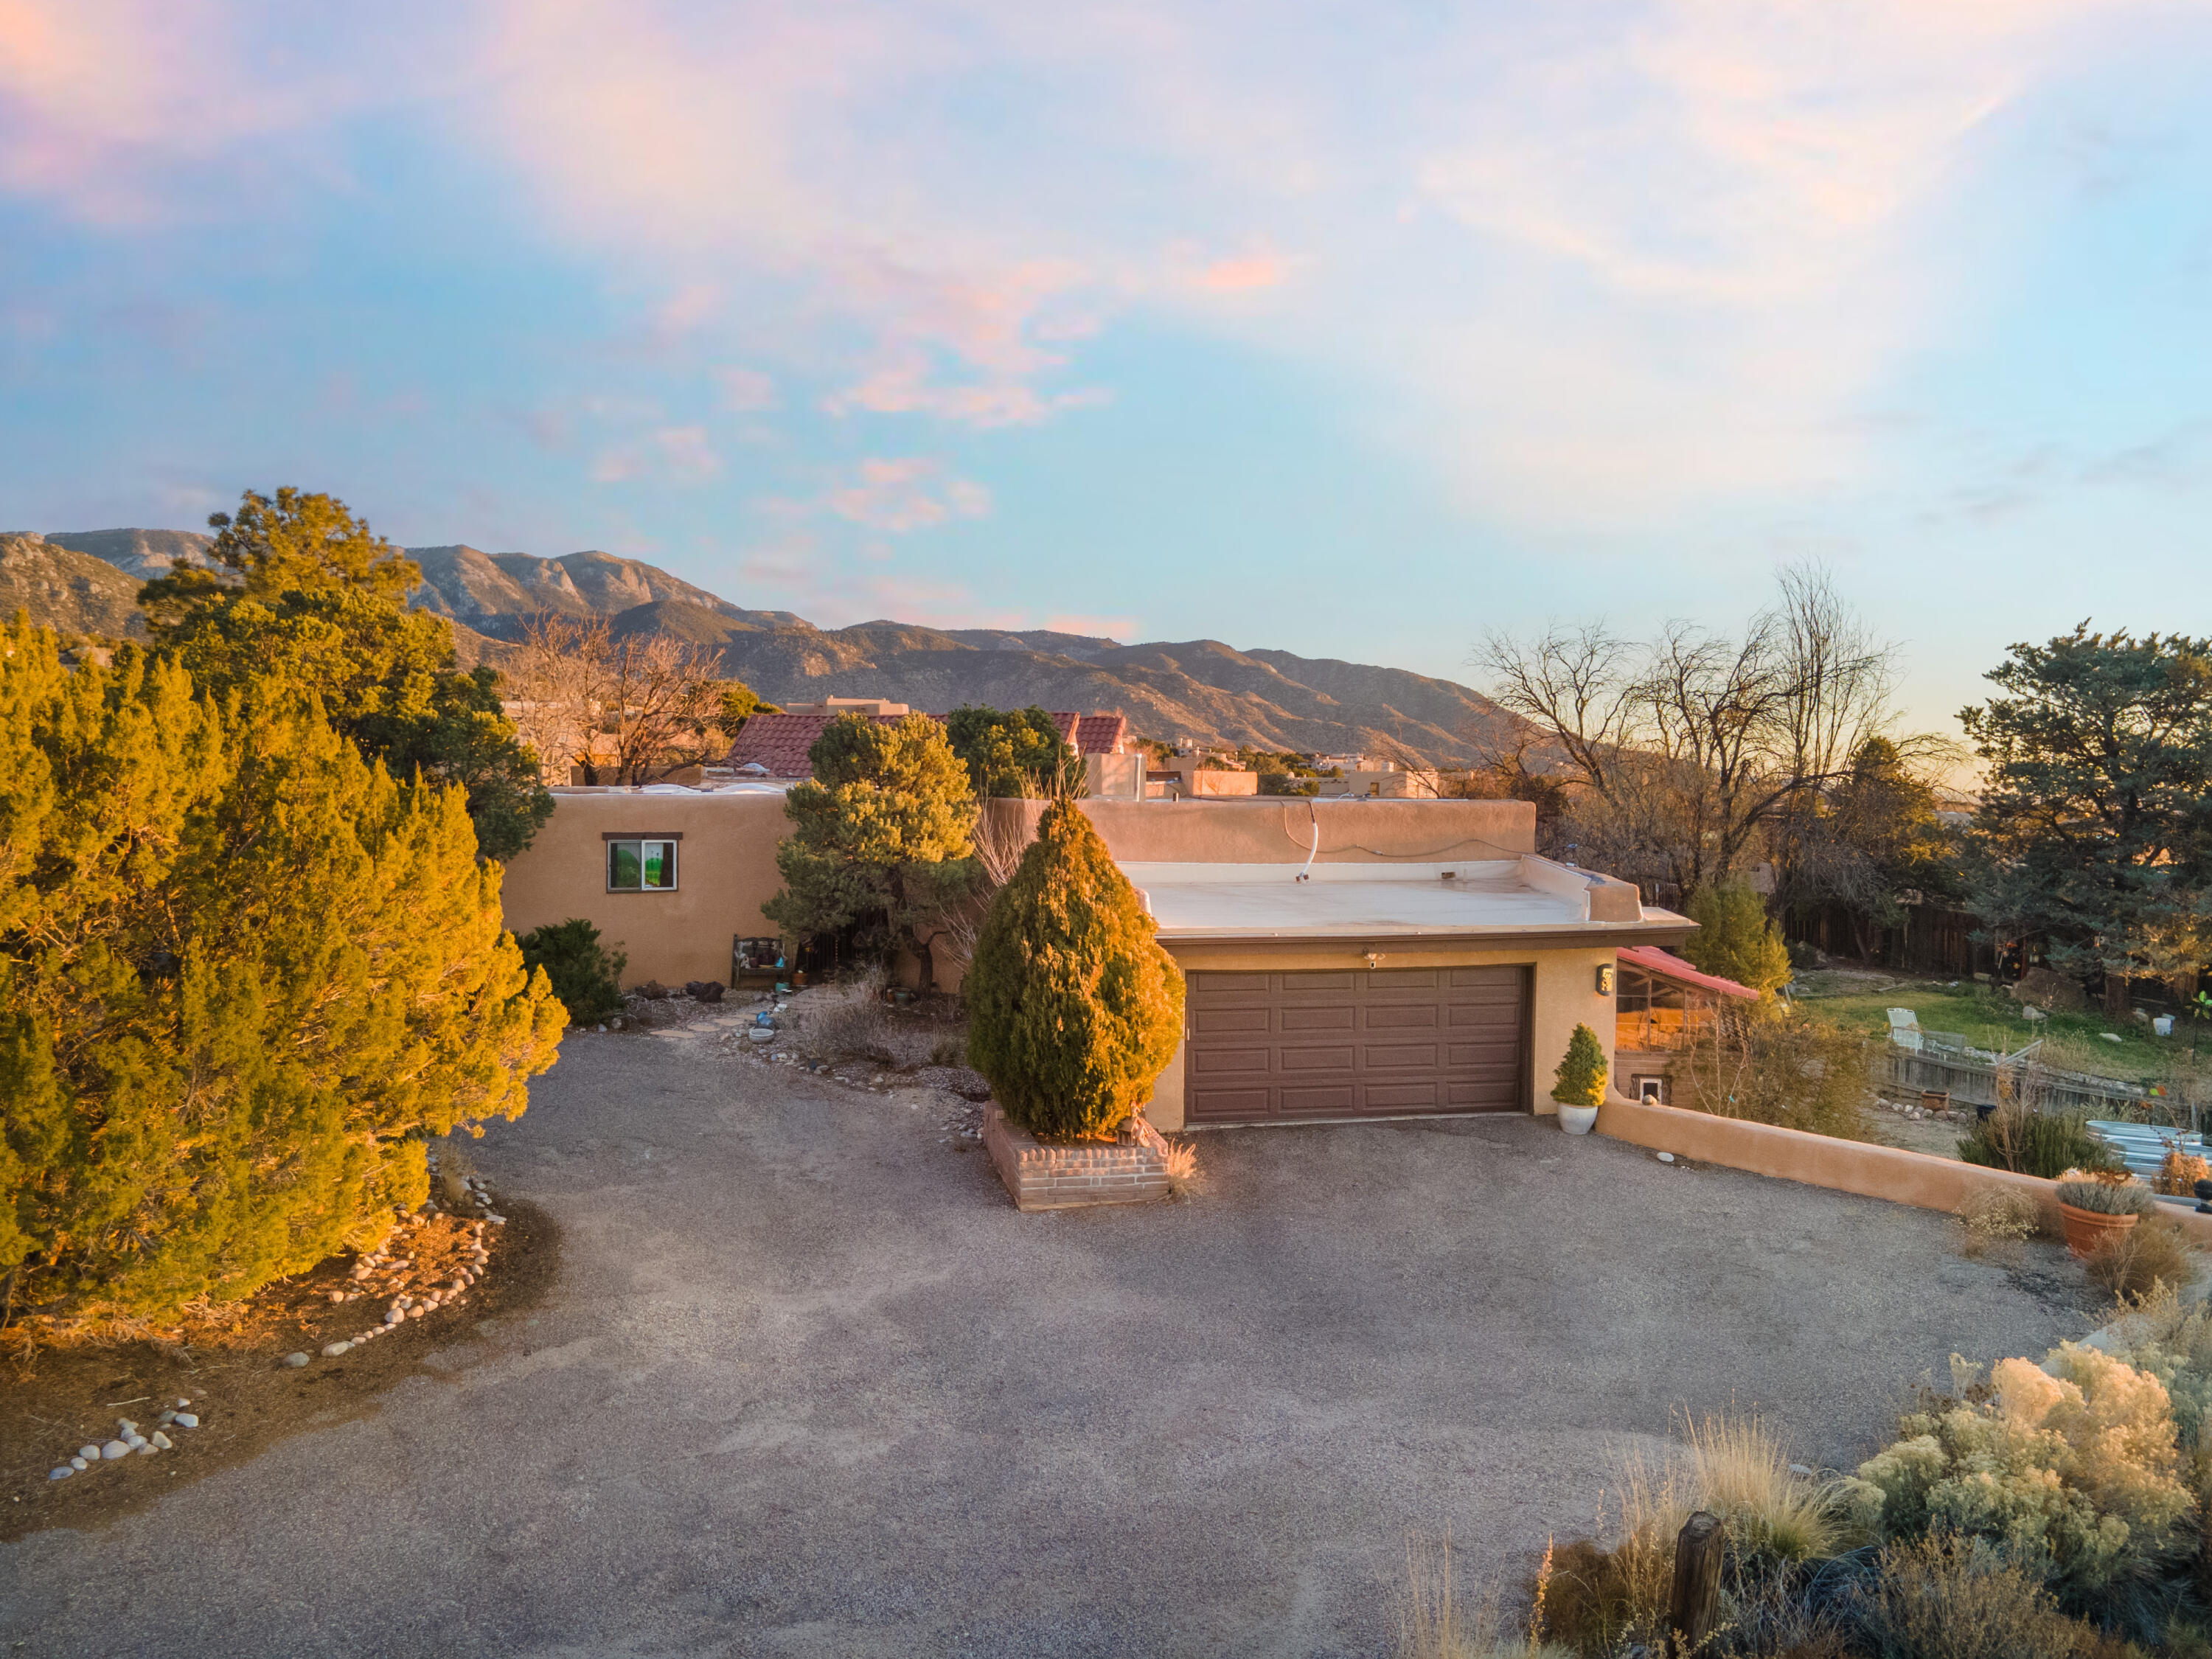 **OPEN HOUSE SAT 12-3:30pm**Situated on one of the best fenced in lots (.88 acres) in SANDIA HEIGHTS! Wonderful VIEWS of the Sandias. Single level 4 bdrm home that offers a beautiful great room w/tongue & groove beam ceiling, & cozy pellet stove fireplace. Opens to the circular formal dining room and gourmet kitchen with island. The primary suite showcases the incredible mountain VIEWS with its own private courtyard. Nice sized secondary bedrooms. Enclosed 1,800+ sqft pool/recreational room (not included with sqft) needs TLC. Outside porch with banco and fireplace.  Refrigerated air. Backyard with an area for a vegetable garden. 2 Car garage with work bench. **SELLERS WANT TO SELL IN ''AS IS'' CONDITION.** PRICE REFLECTS CONDITION.